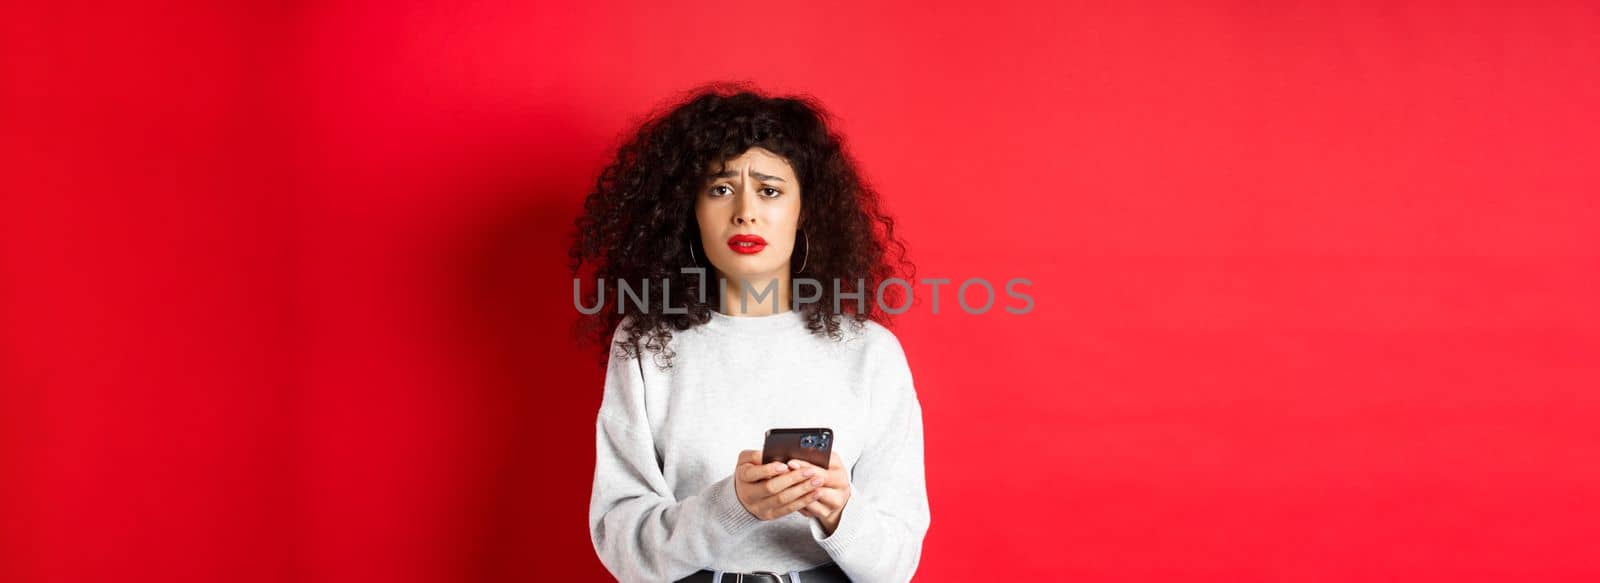 Sad and gloomy woman with curly hair, frowning and feel upset after reading smartphone message, standing disappointed against red background.